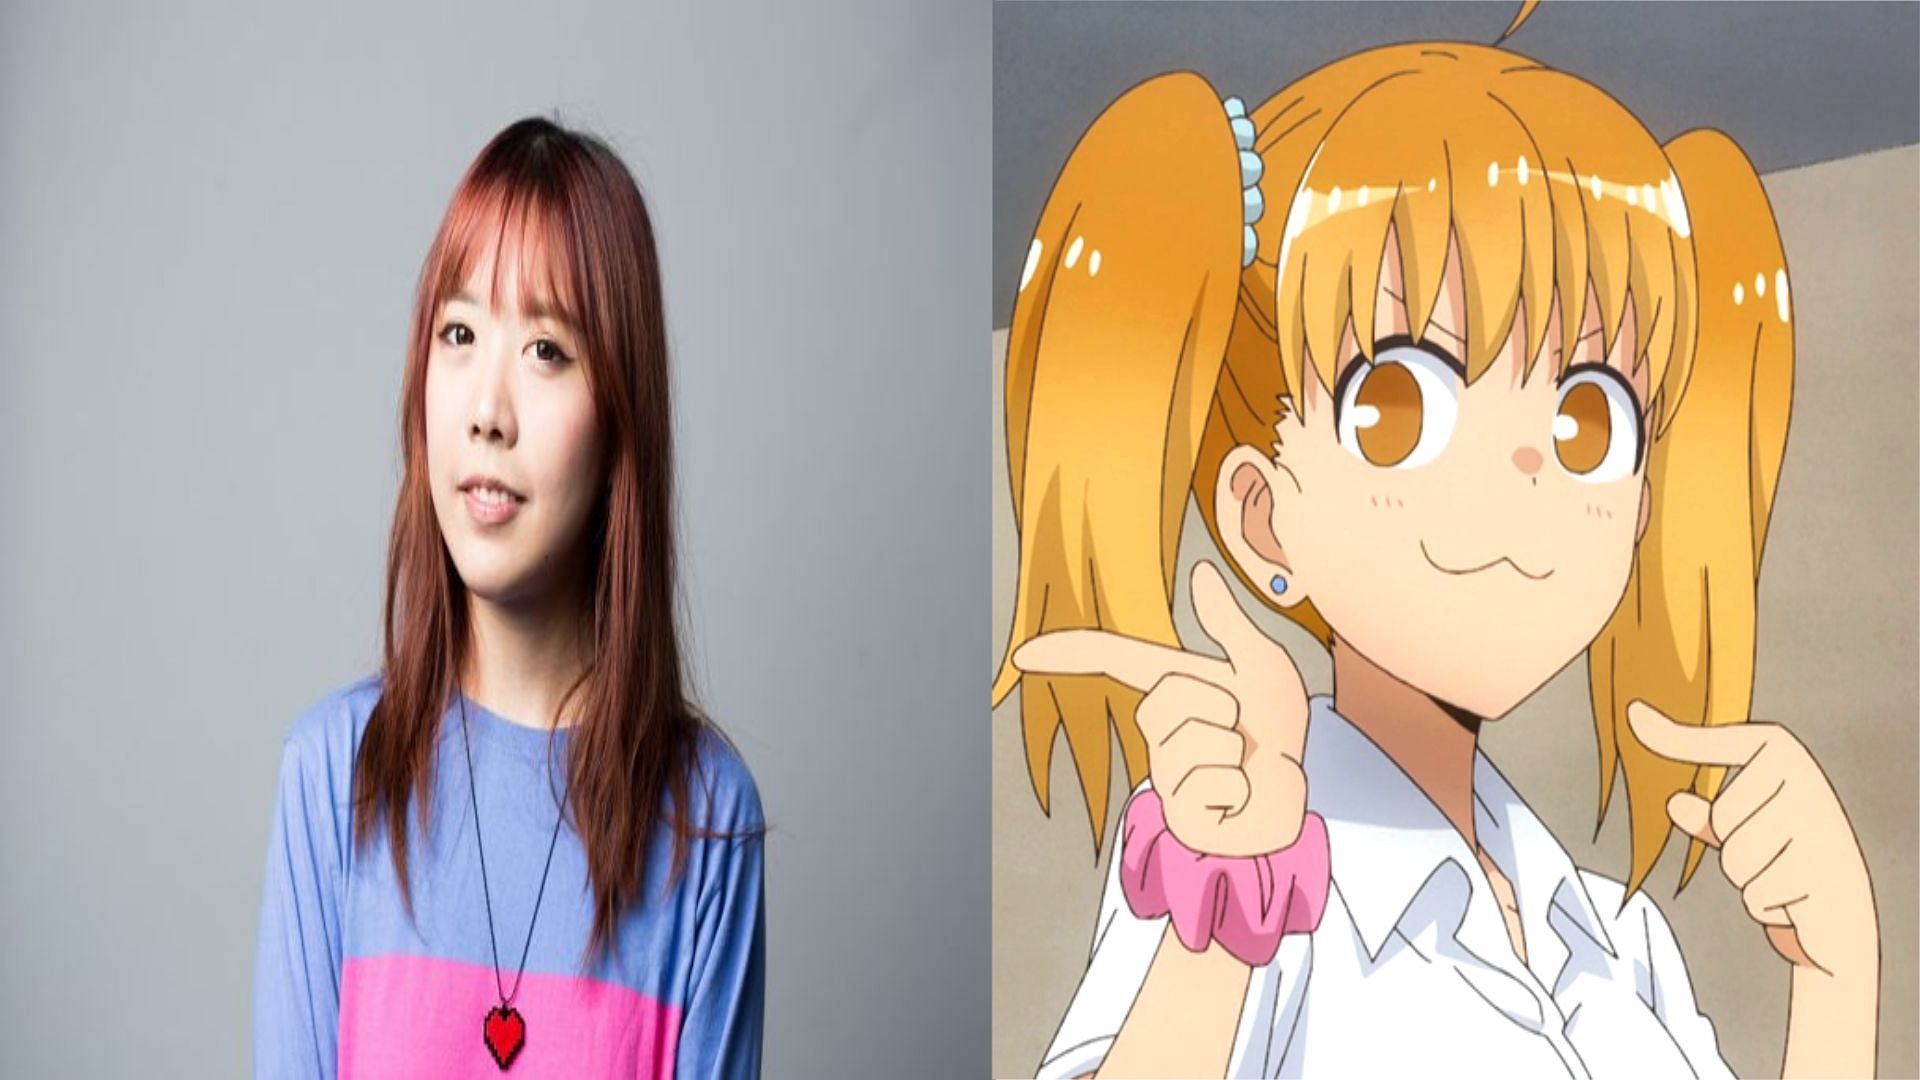 LilyPichu will voice the character Yoshi in the anime Don&#039;t Toy With Me, Miss Nagatoro (Images via LilyPichu/Twitter and Yoshi via tumgir.com)